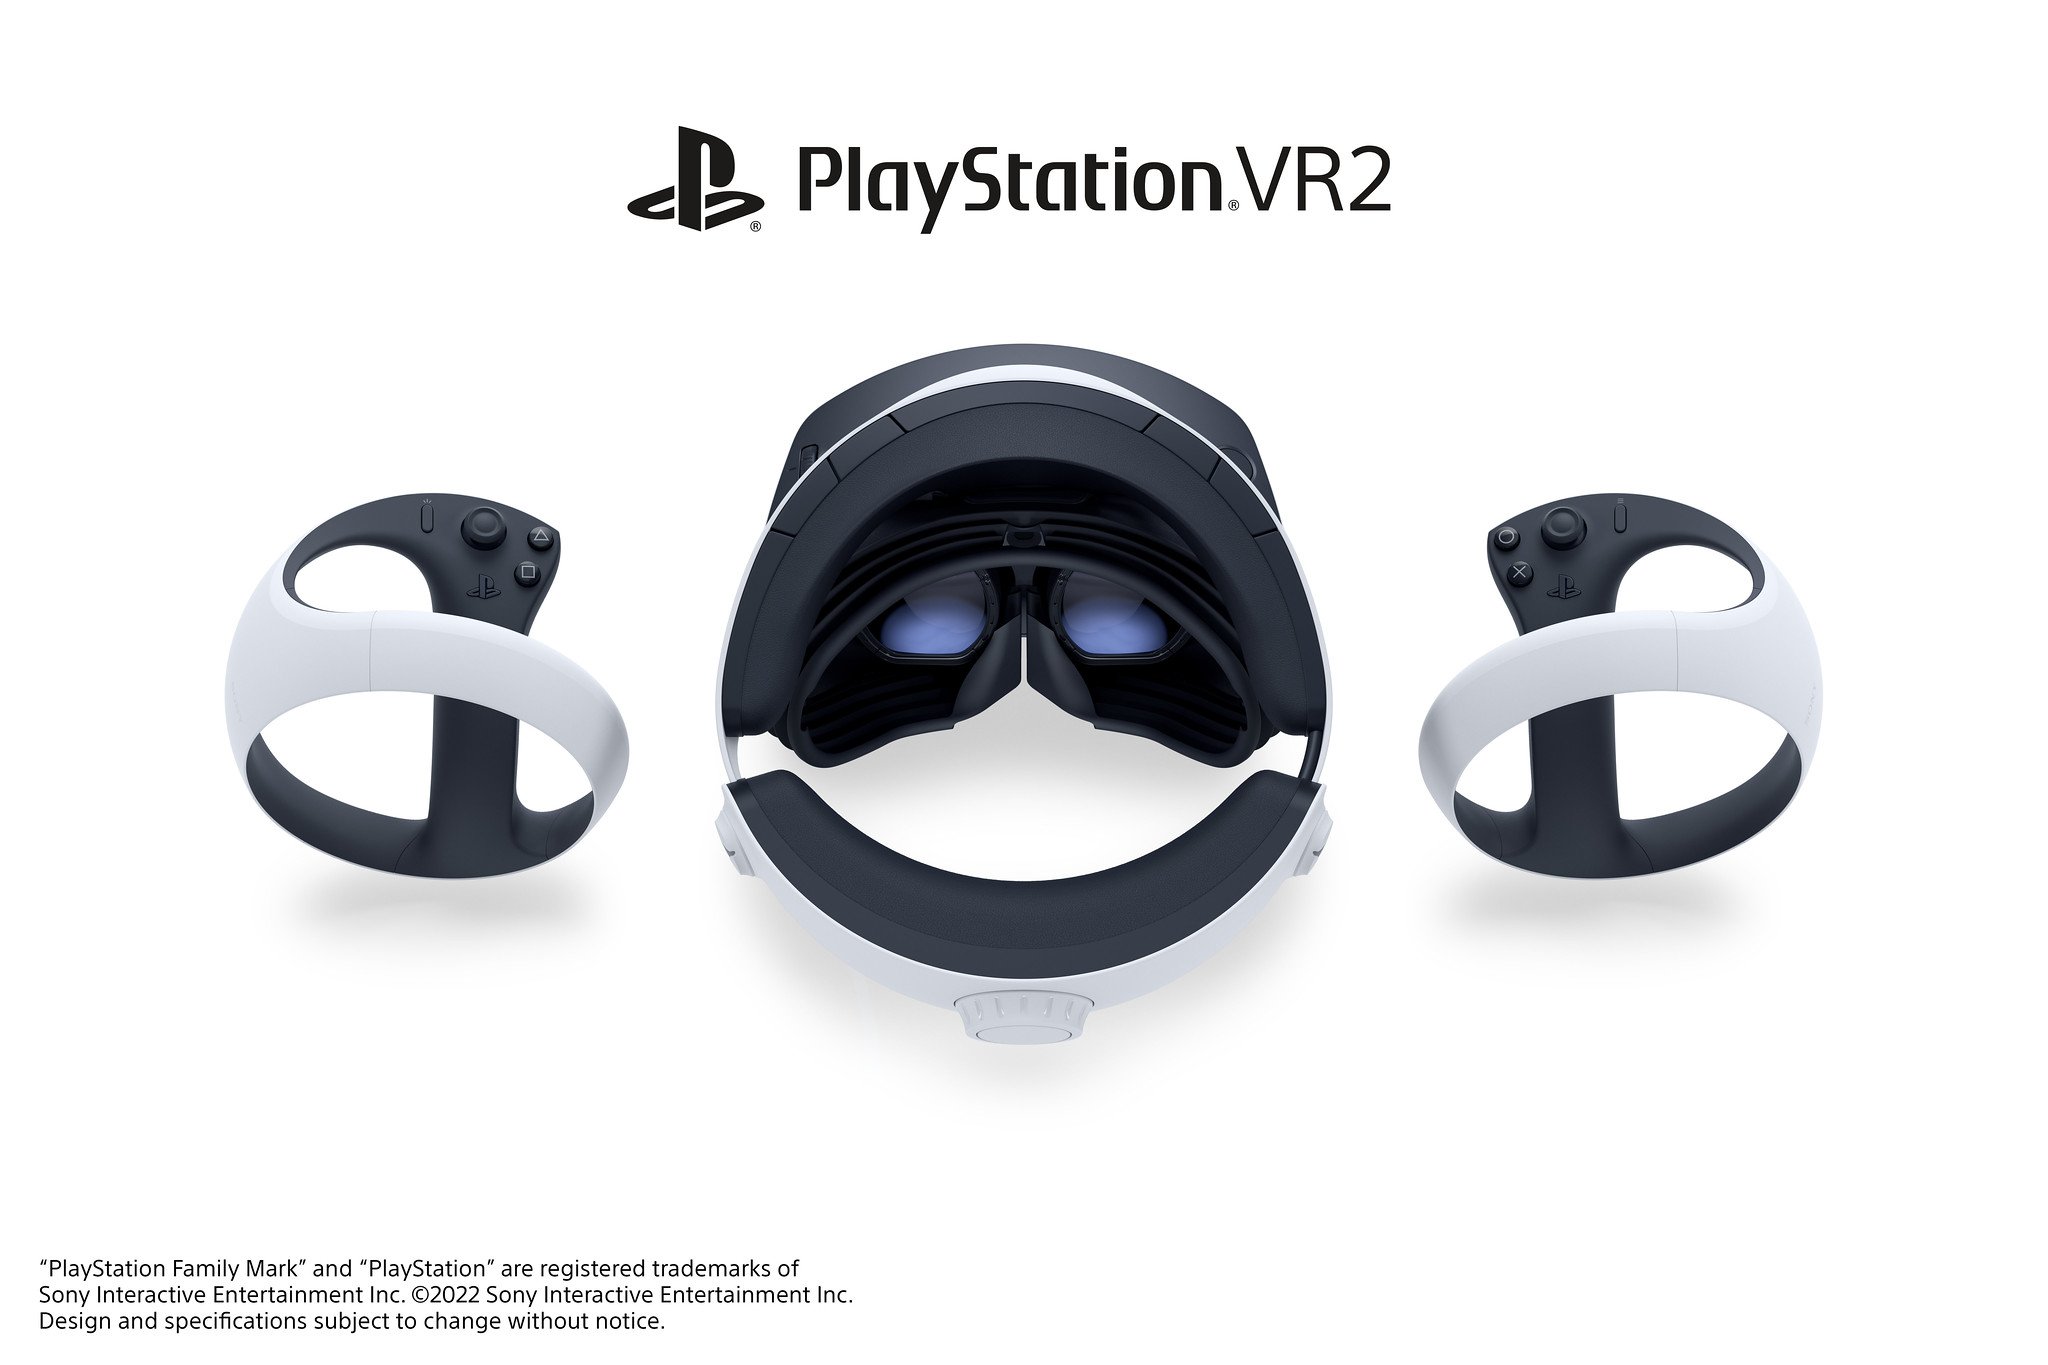 Playstation VR 2: Sony announces 5 new VR games